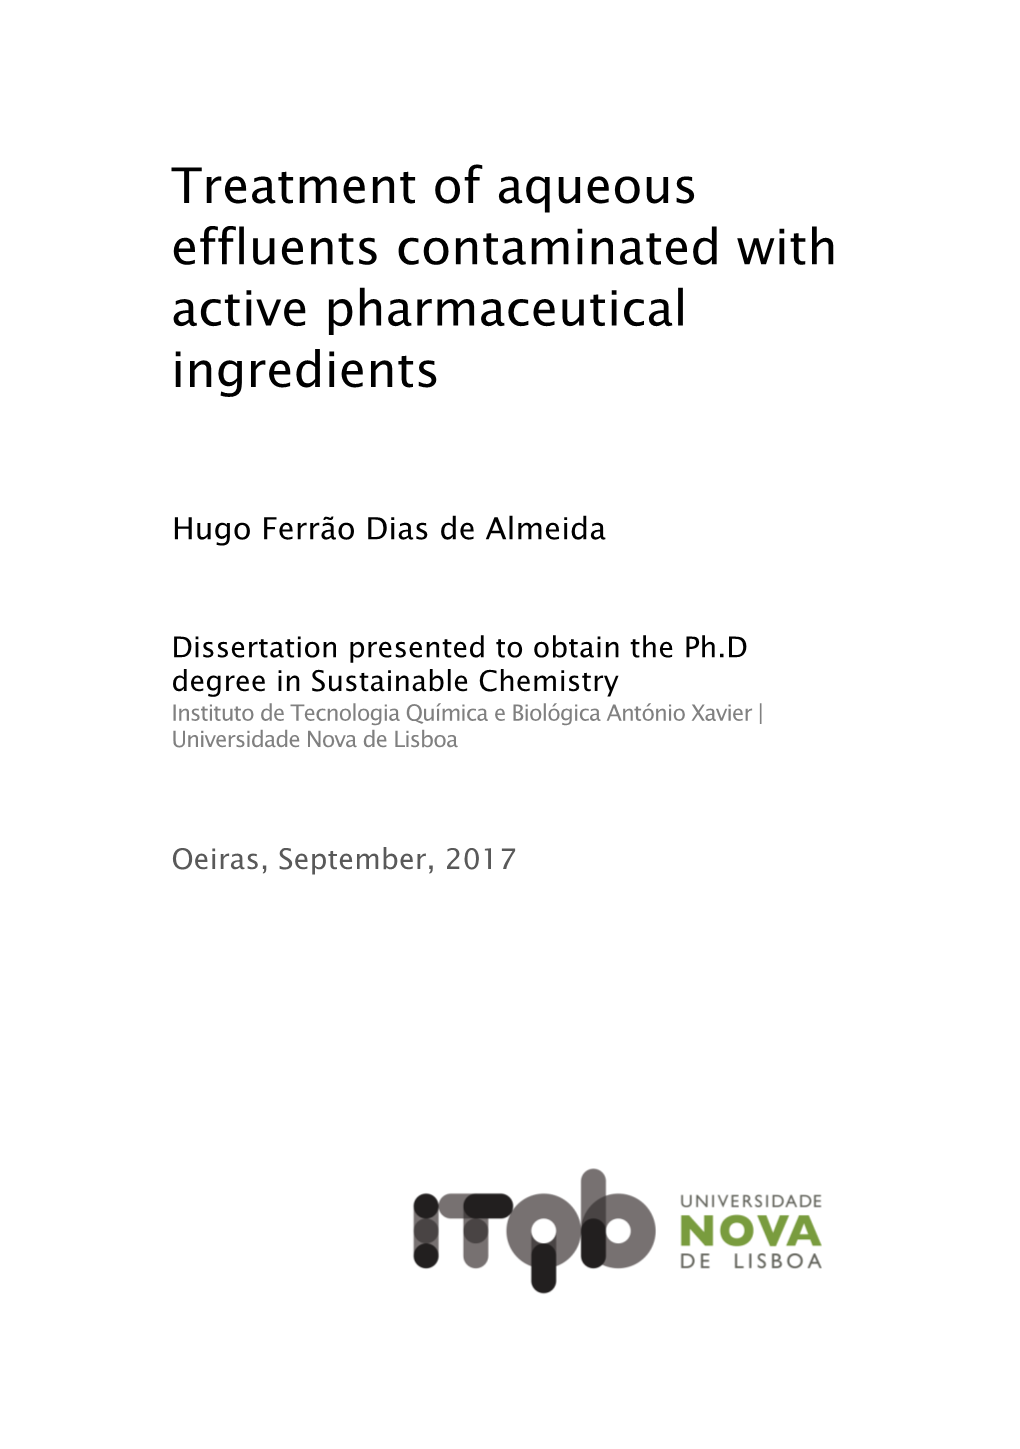 Treatment of Aqueous Effluents Contaminated with Active Pharmaceutical Ingredients